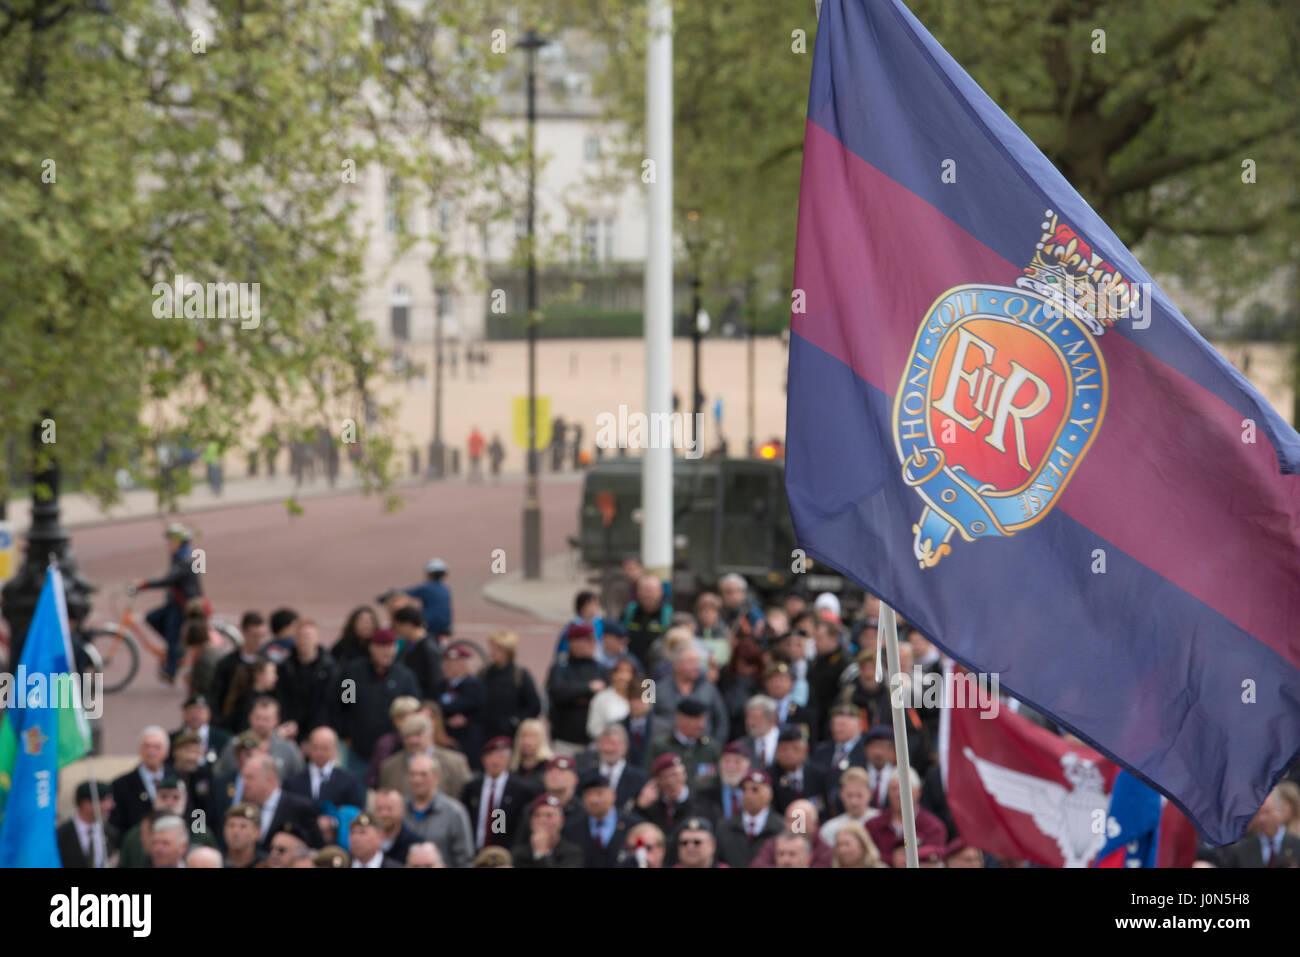 London, UK. 14th April, 2017. Thousands of Veterans, from across the UK have attended a large demonstration in Whitehall, Central London.   The protest was organised by ’Justice for Northern Ireland Veterans’, a group outraged by the recent prosecution of former British Soldiers, who previously served in Northern Ireland during Operation Banner (1969-2007).   The arrests have been described as a politically motivated witchunt by MPs and former soldiers, including Northern Ireland Secretary James Brokenshire, and UK Prime Minister Theresa May. Credit: Byron Kirk/Alamy Live News Stock Photo